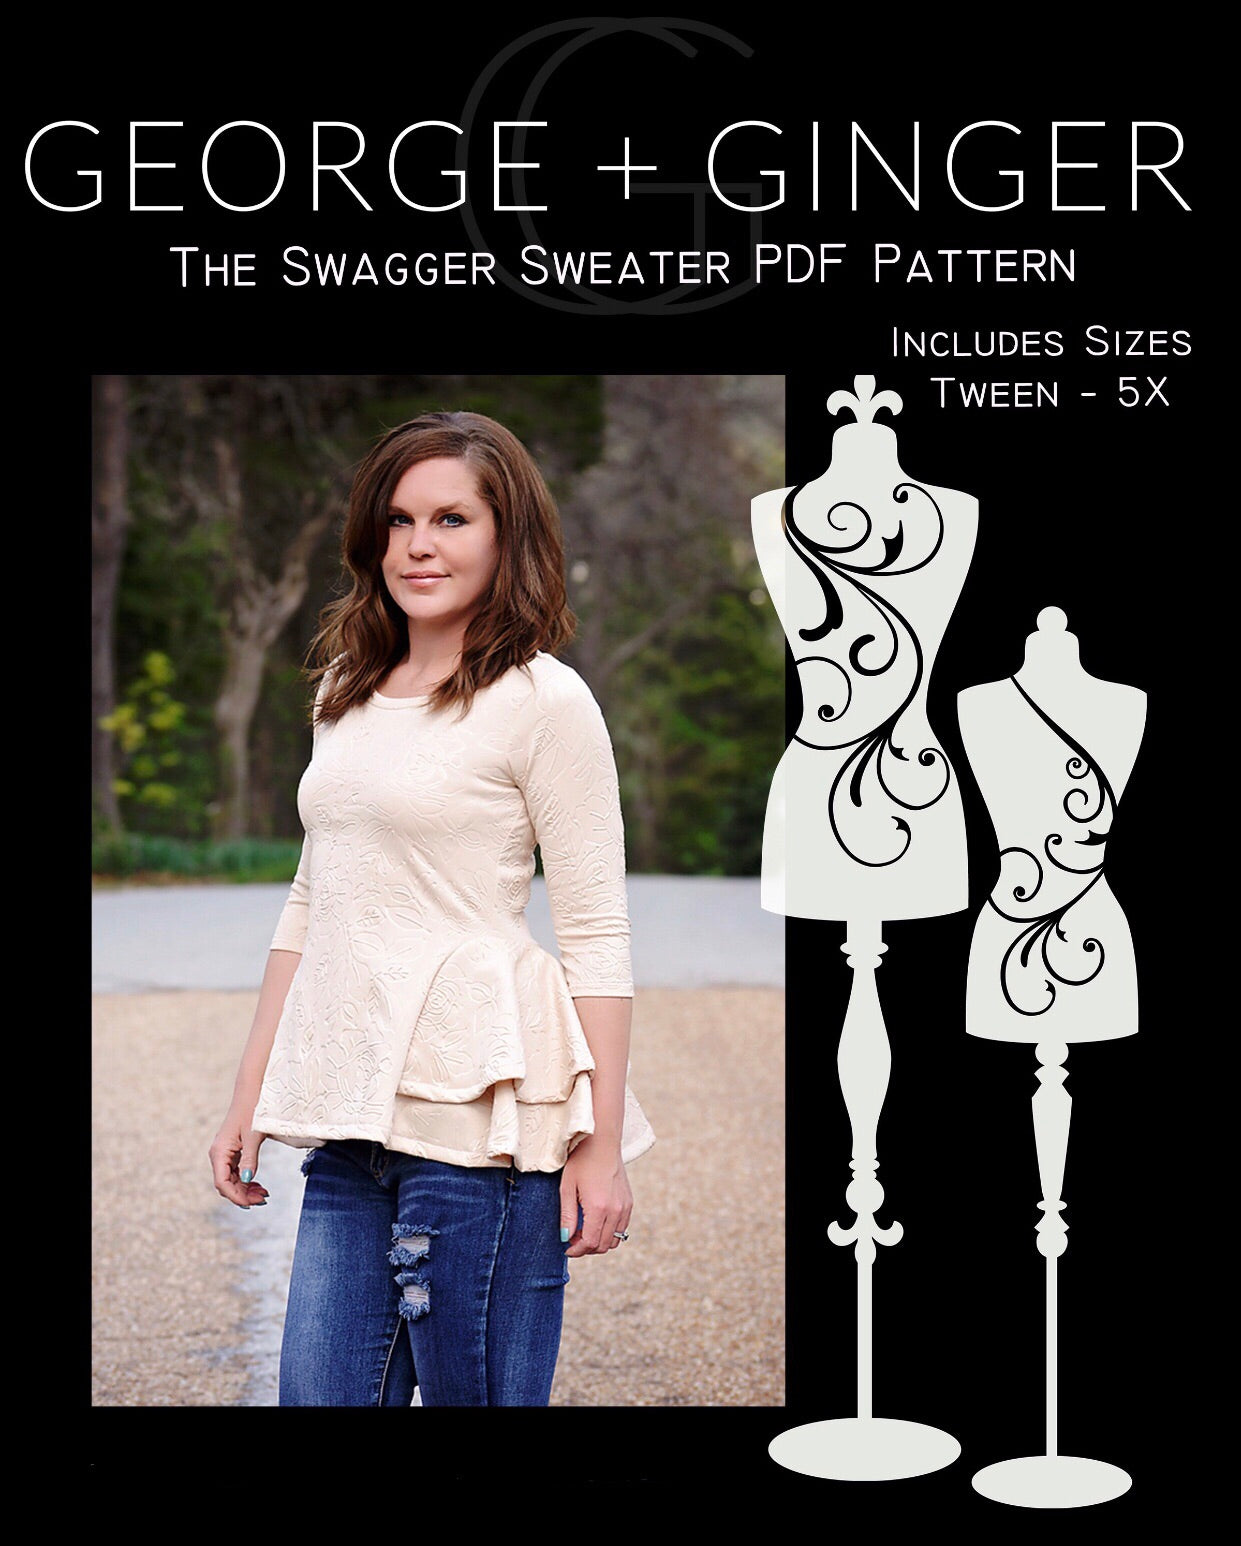 The Swagger Sweater PDF Sewing Pattern